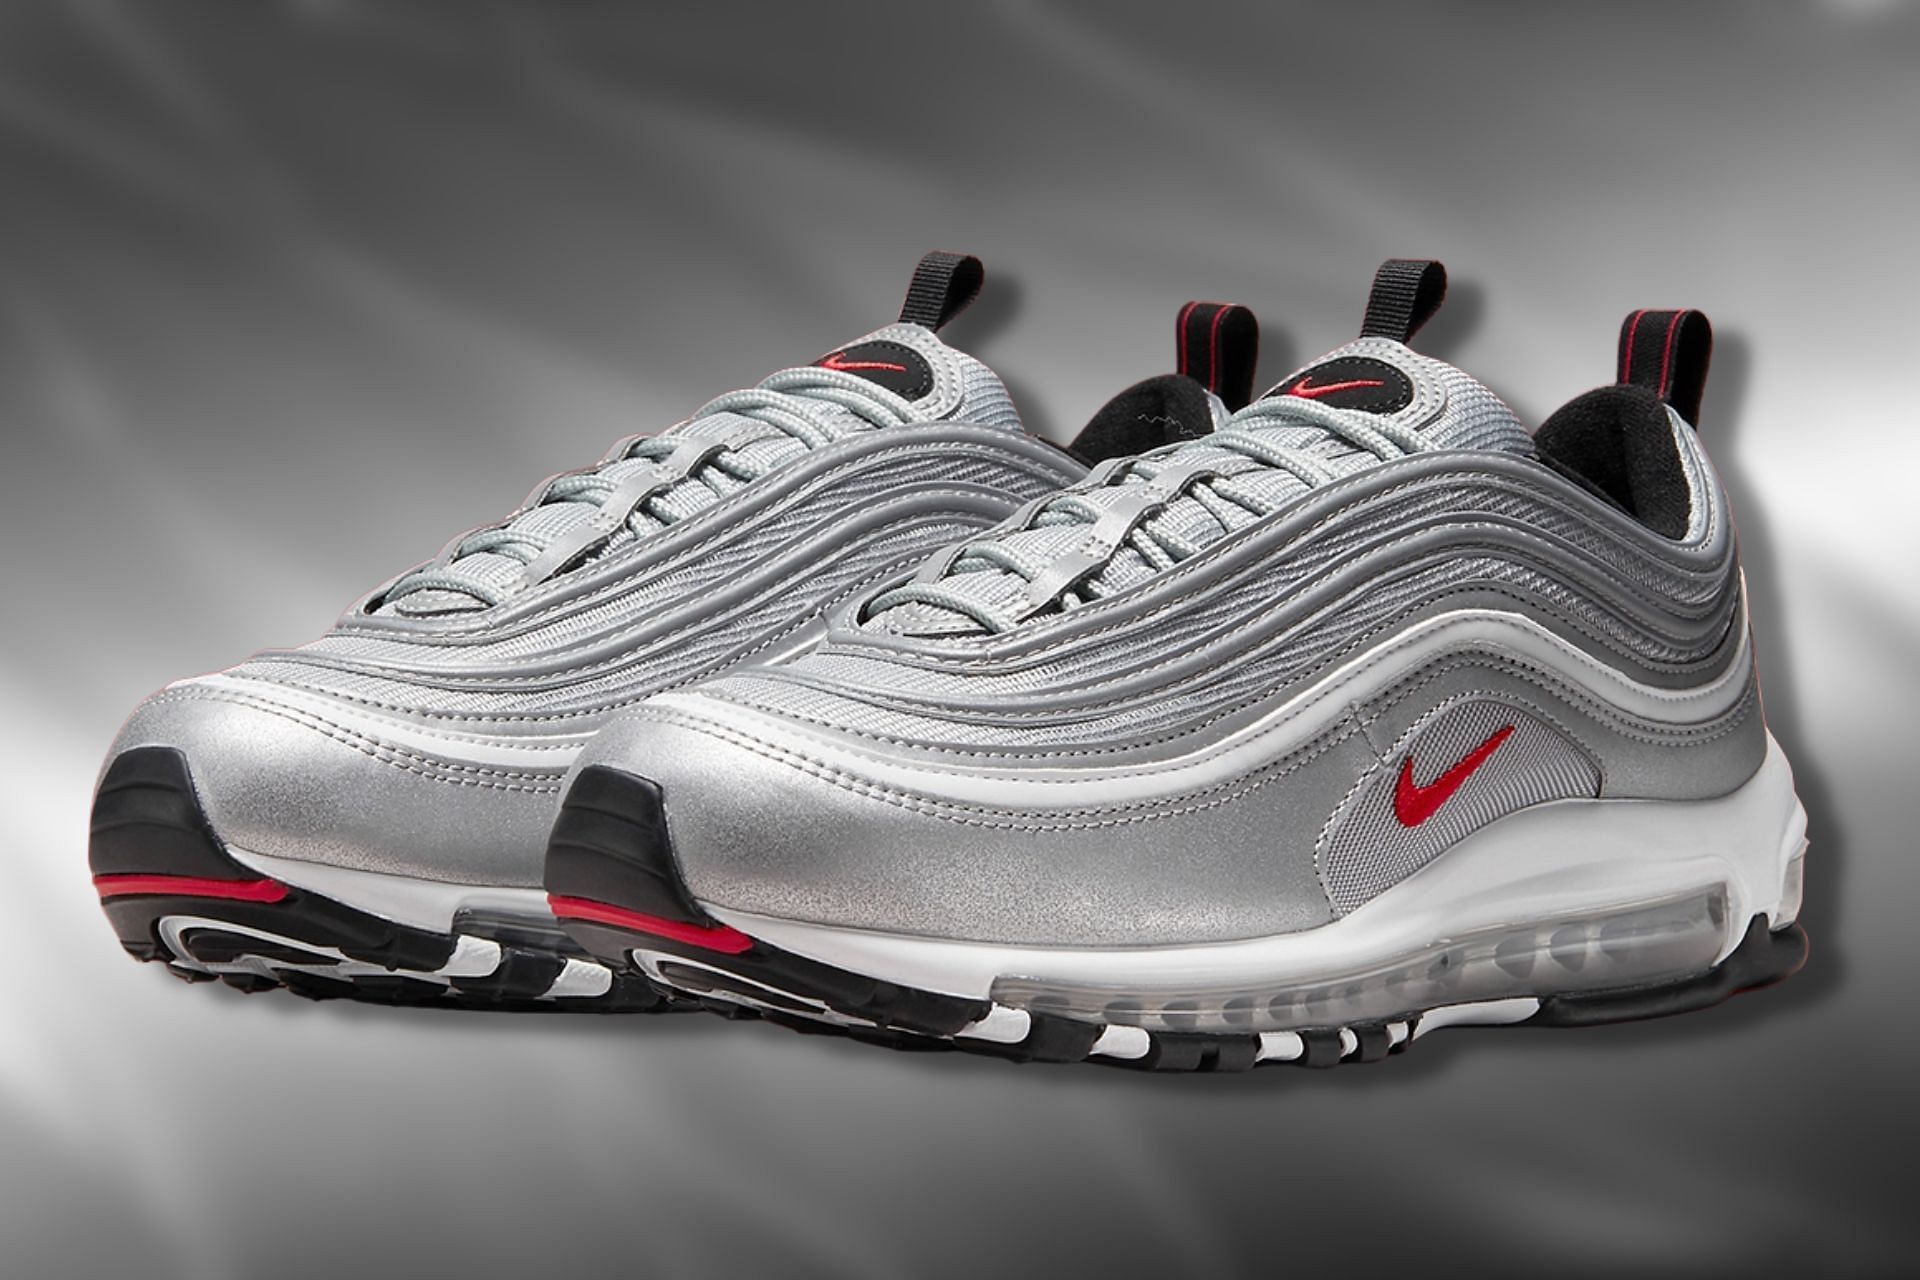 Where buy Nike Air Max 97 Bullet colorway? Price, release date, more details explored